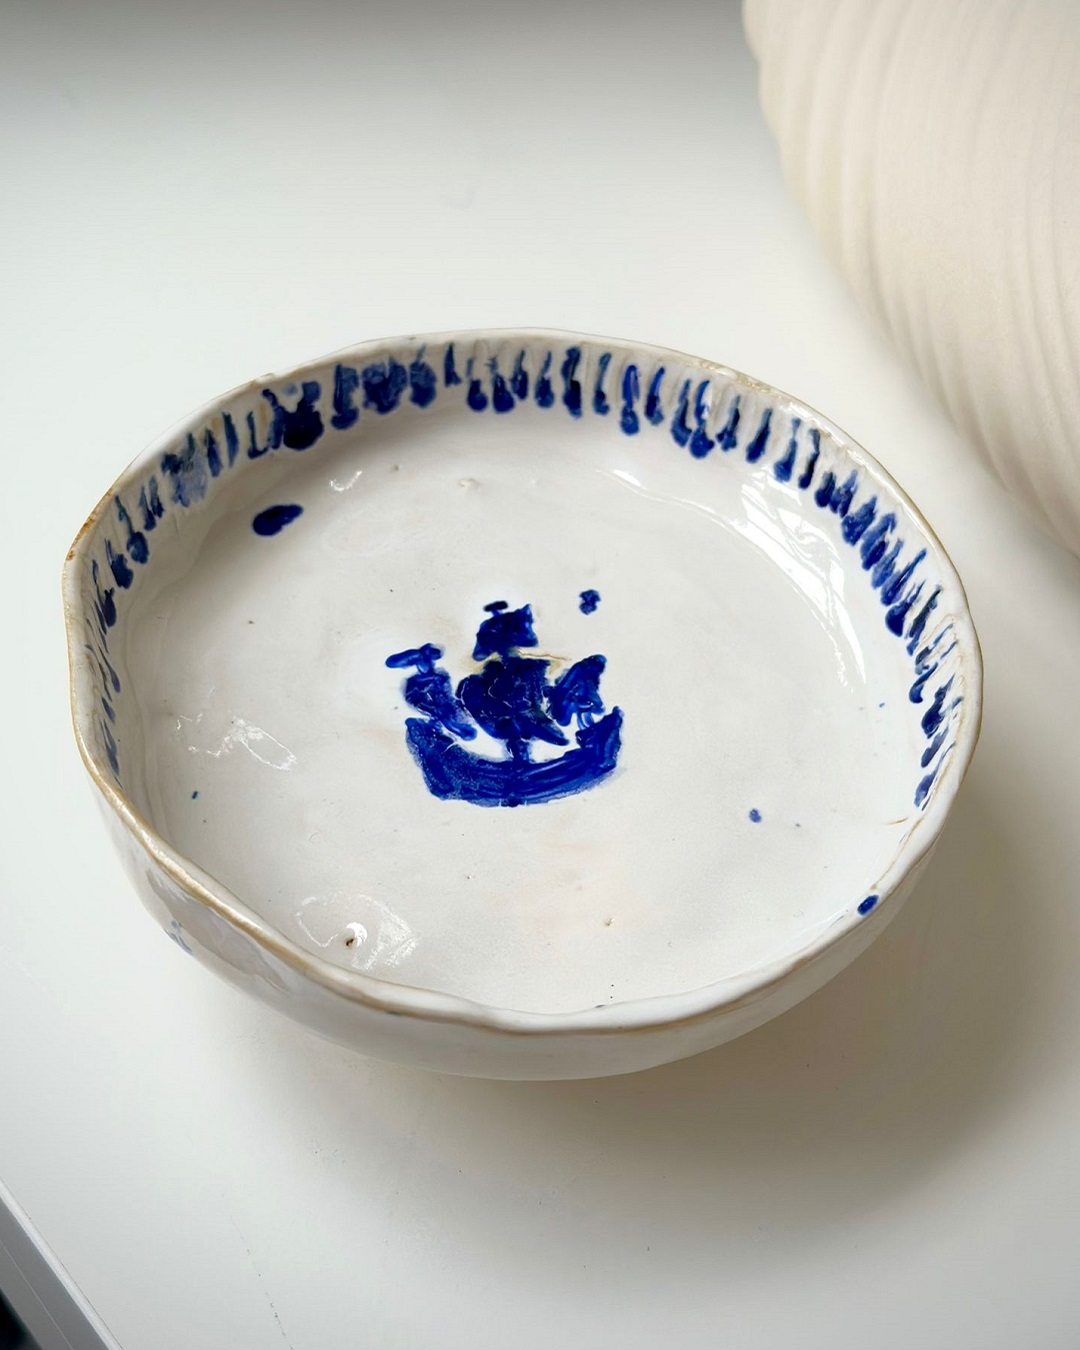 Dish with blue boat on it